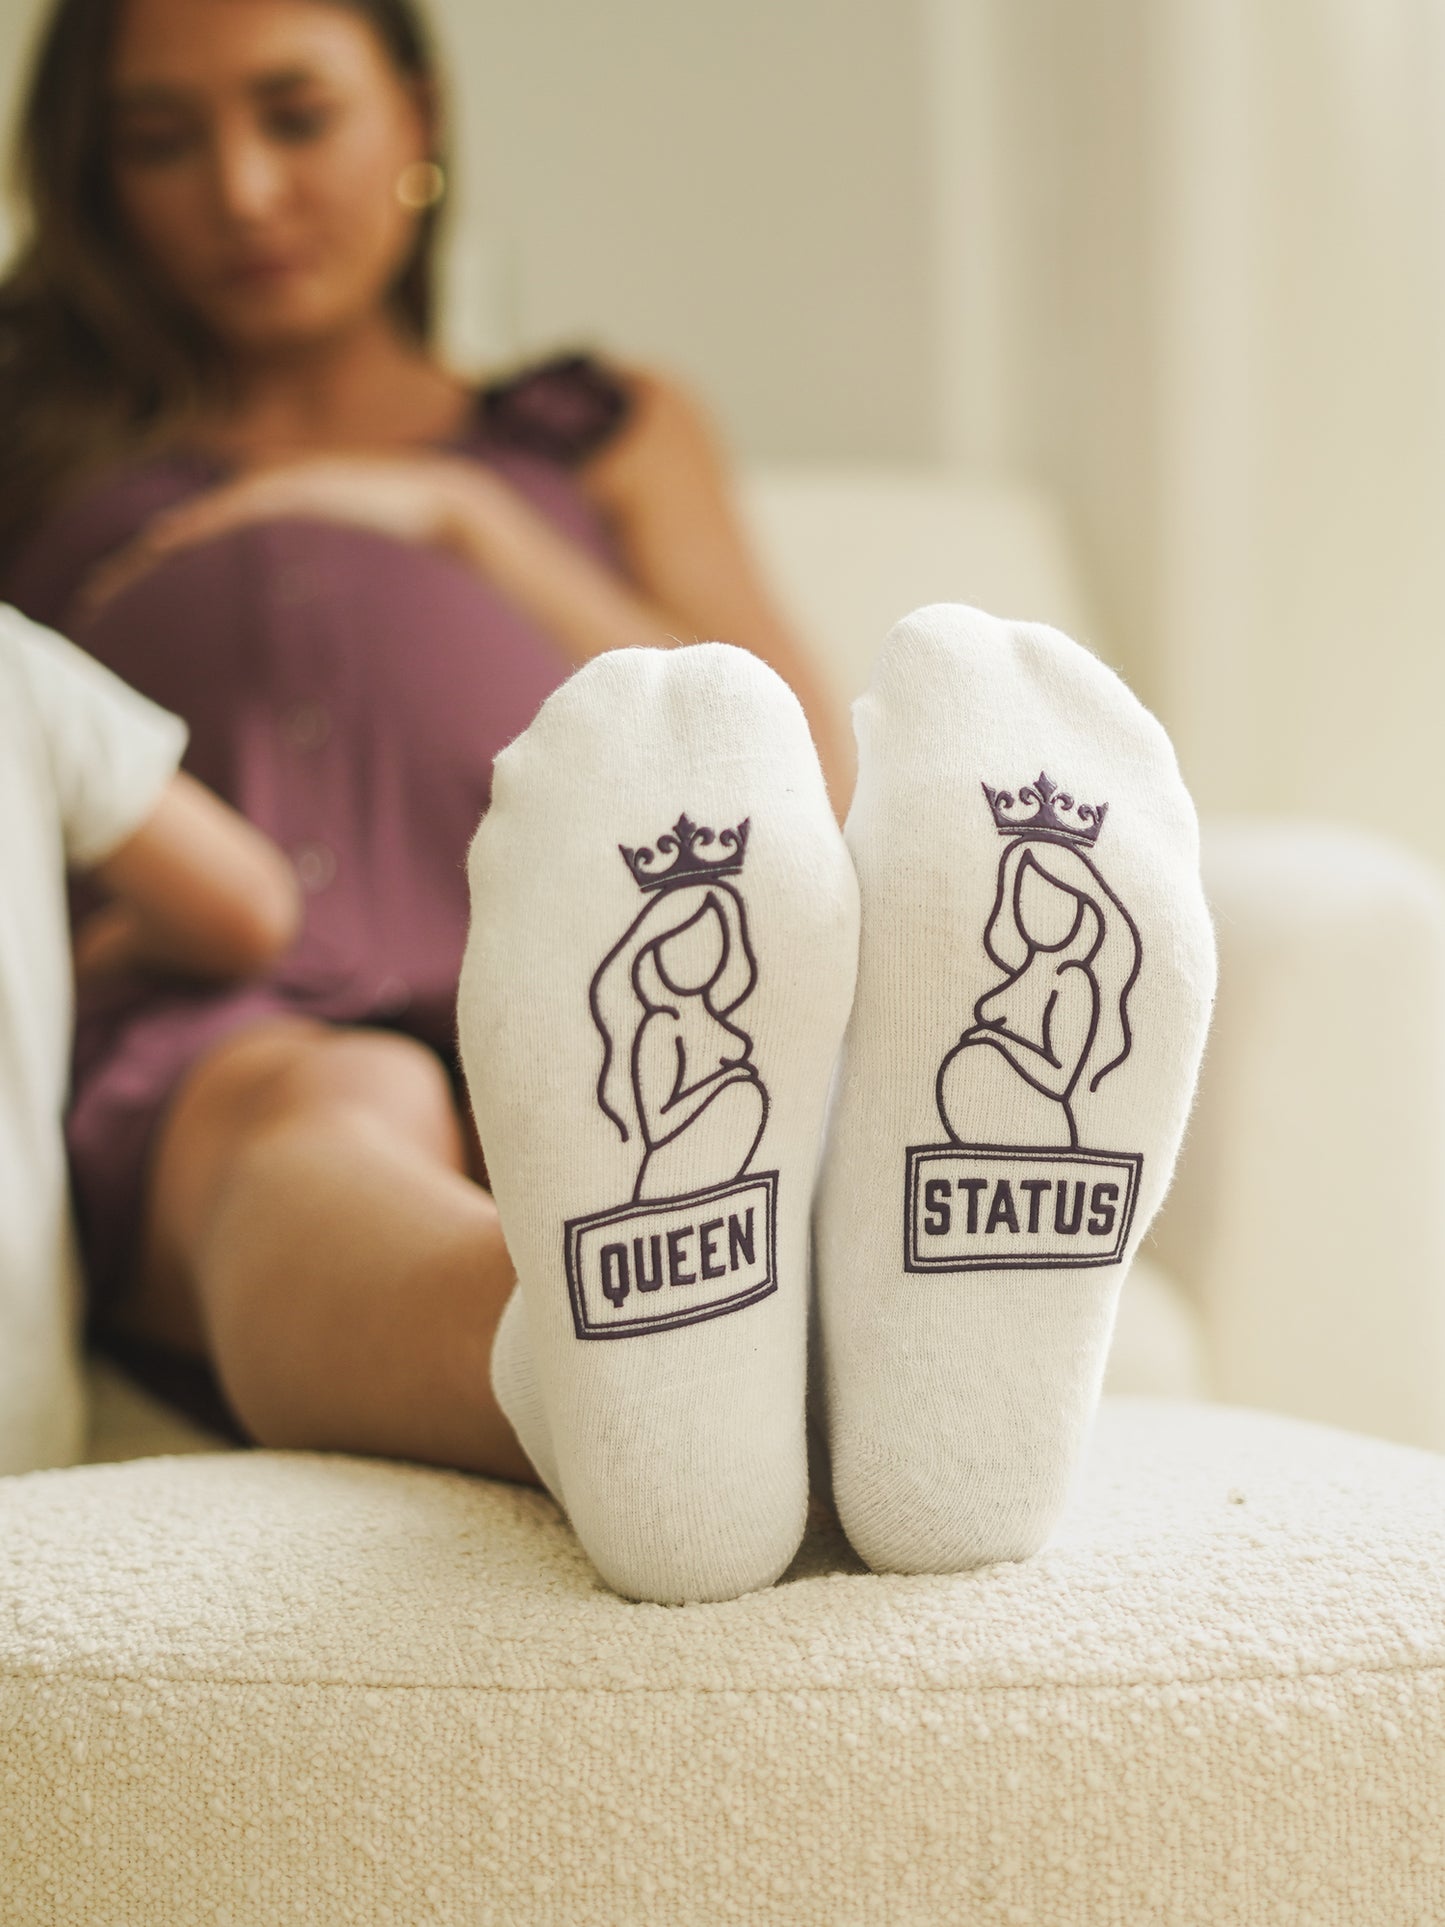 Model sitting on chair with feet on ottoman wearing Queen Status Labor & Delivery Socks